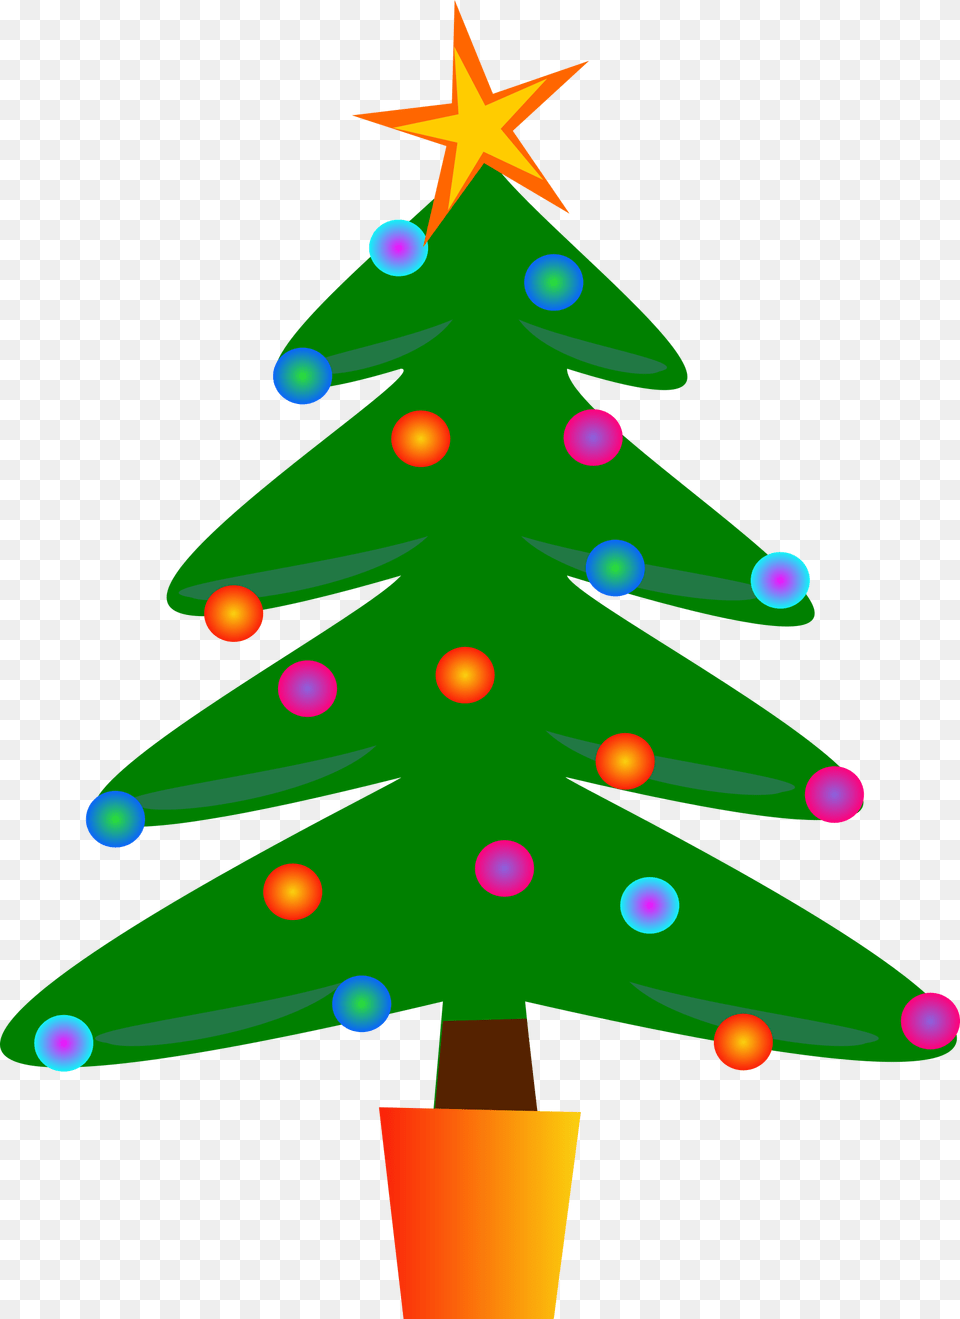 Image Seo All Tree Clipart Post, Lighting, Plant, Christmas, Christmas Decorations Free Transparent Png